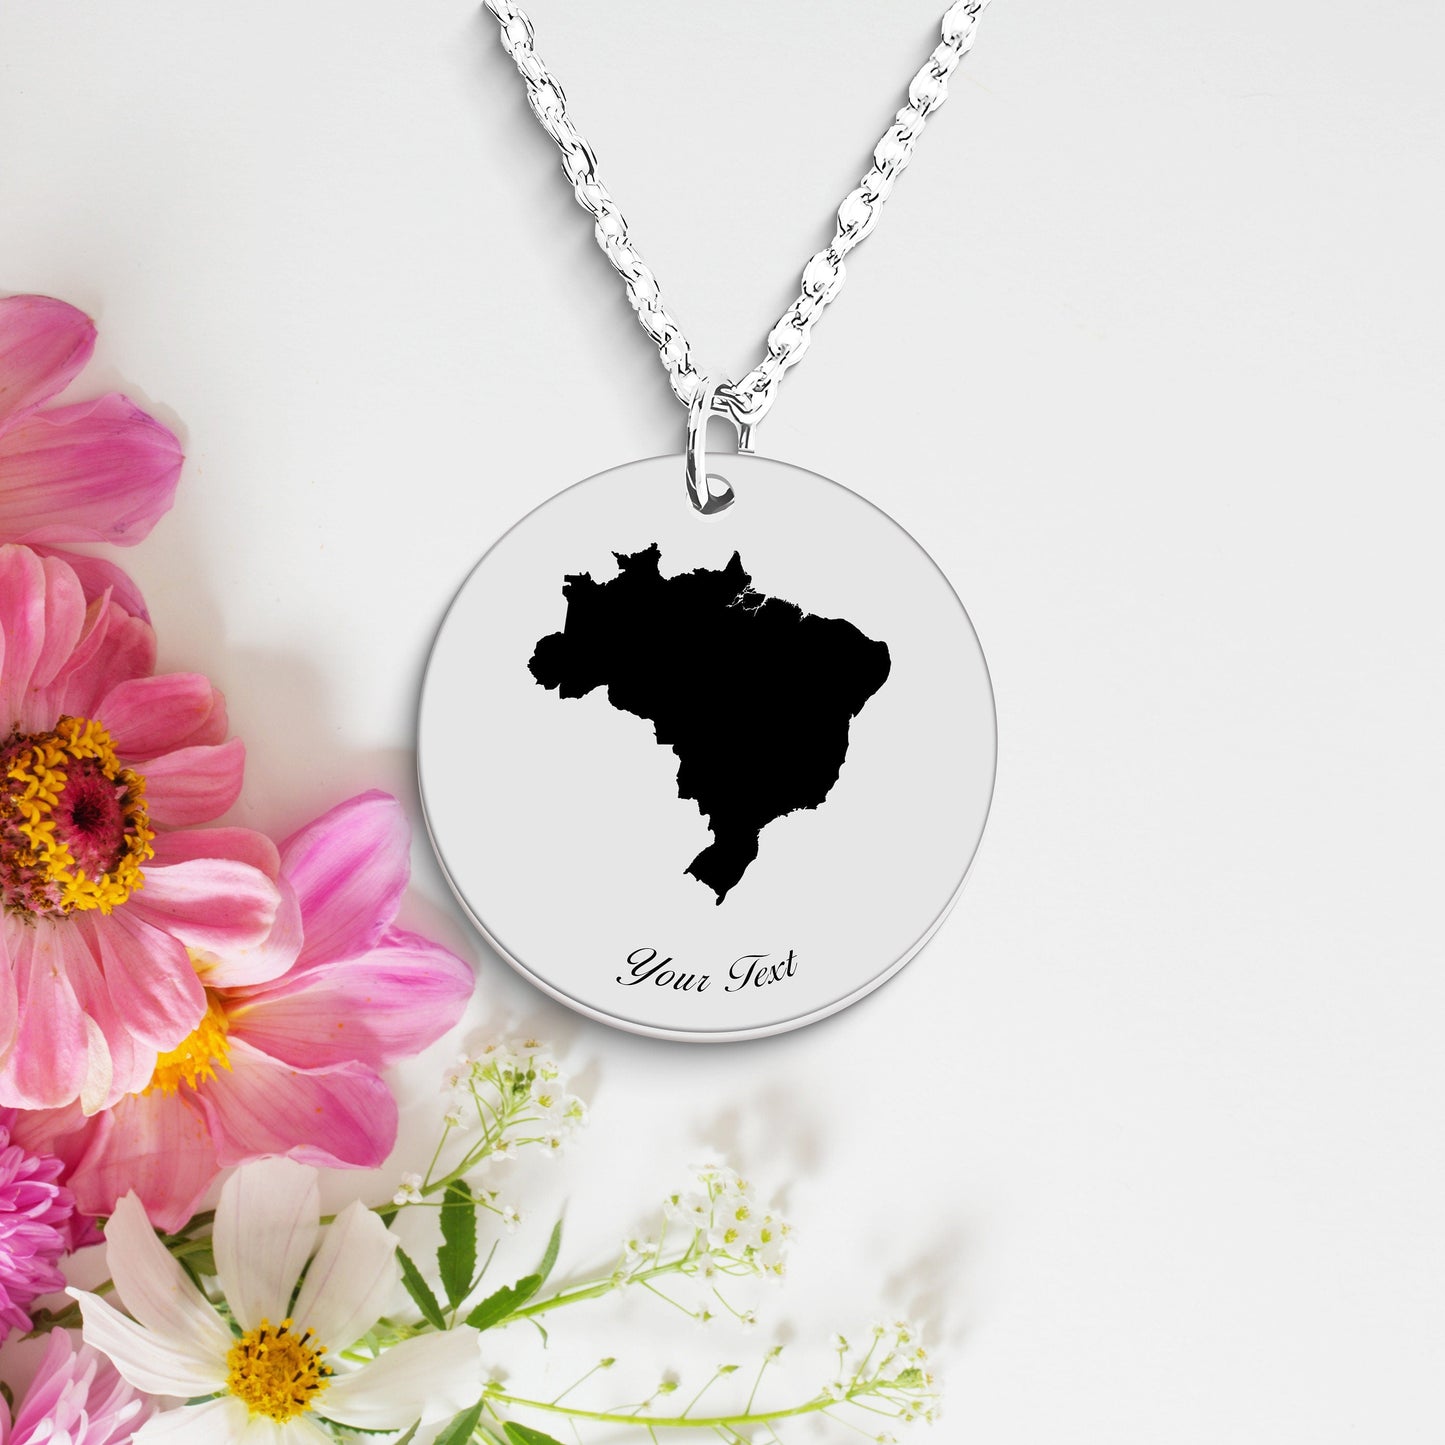 Brazil Country Map Necklace, Your Name Necklace, Minimalist Necklace, Personalized Gift, Silver Necklace, Gift For Him Her